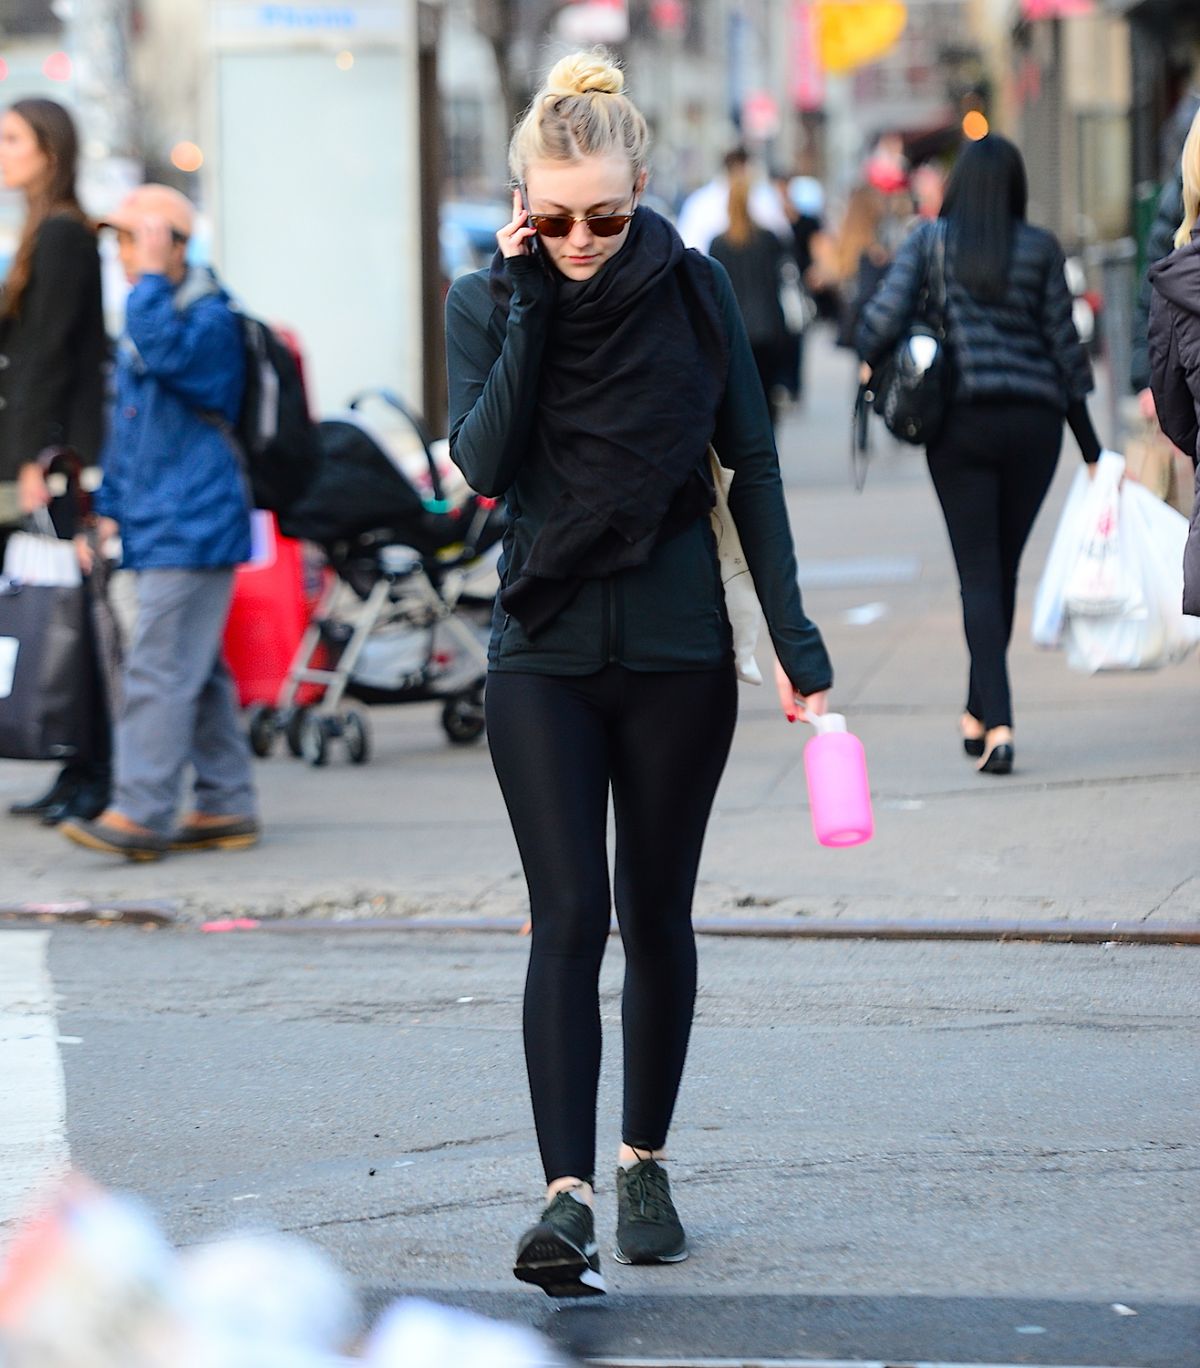 DAKOTA FANNING in Tights Out and About in New York – HawtCelebs